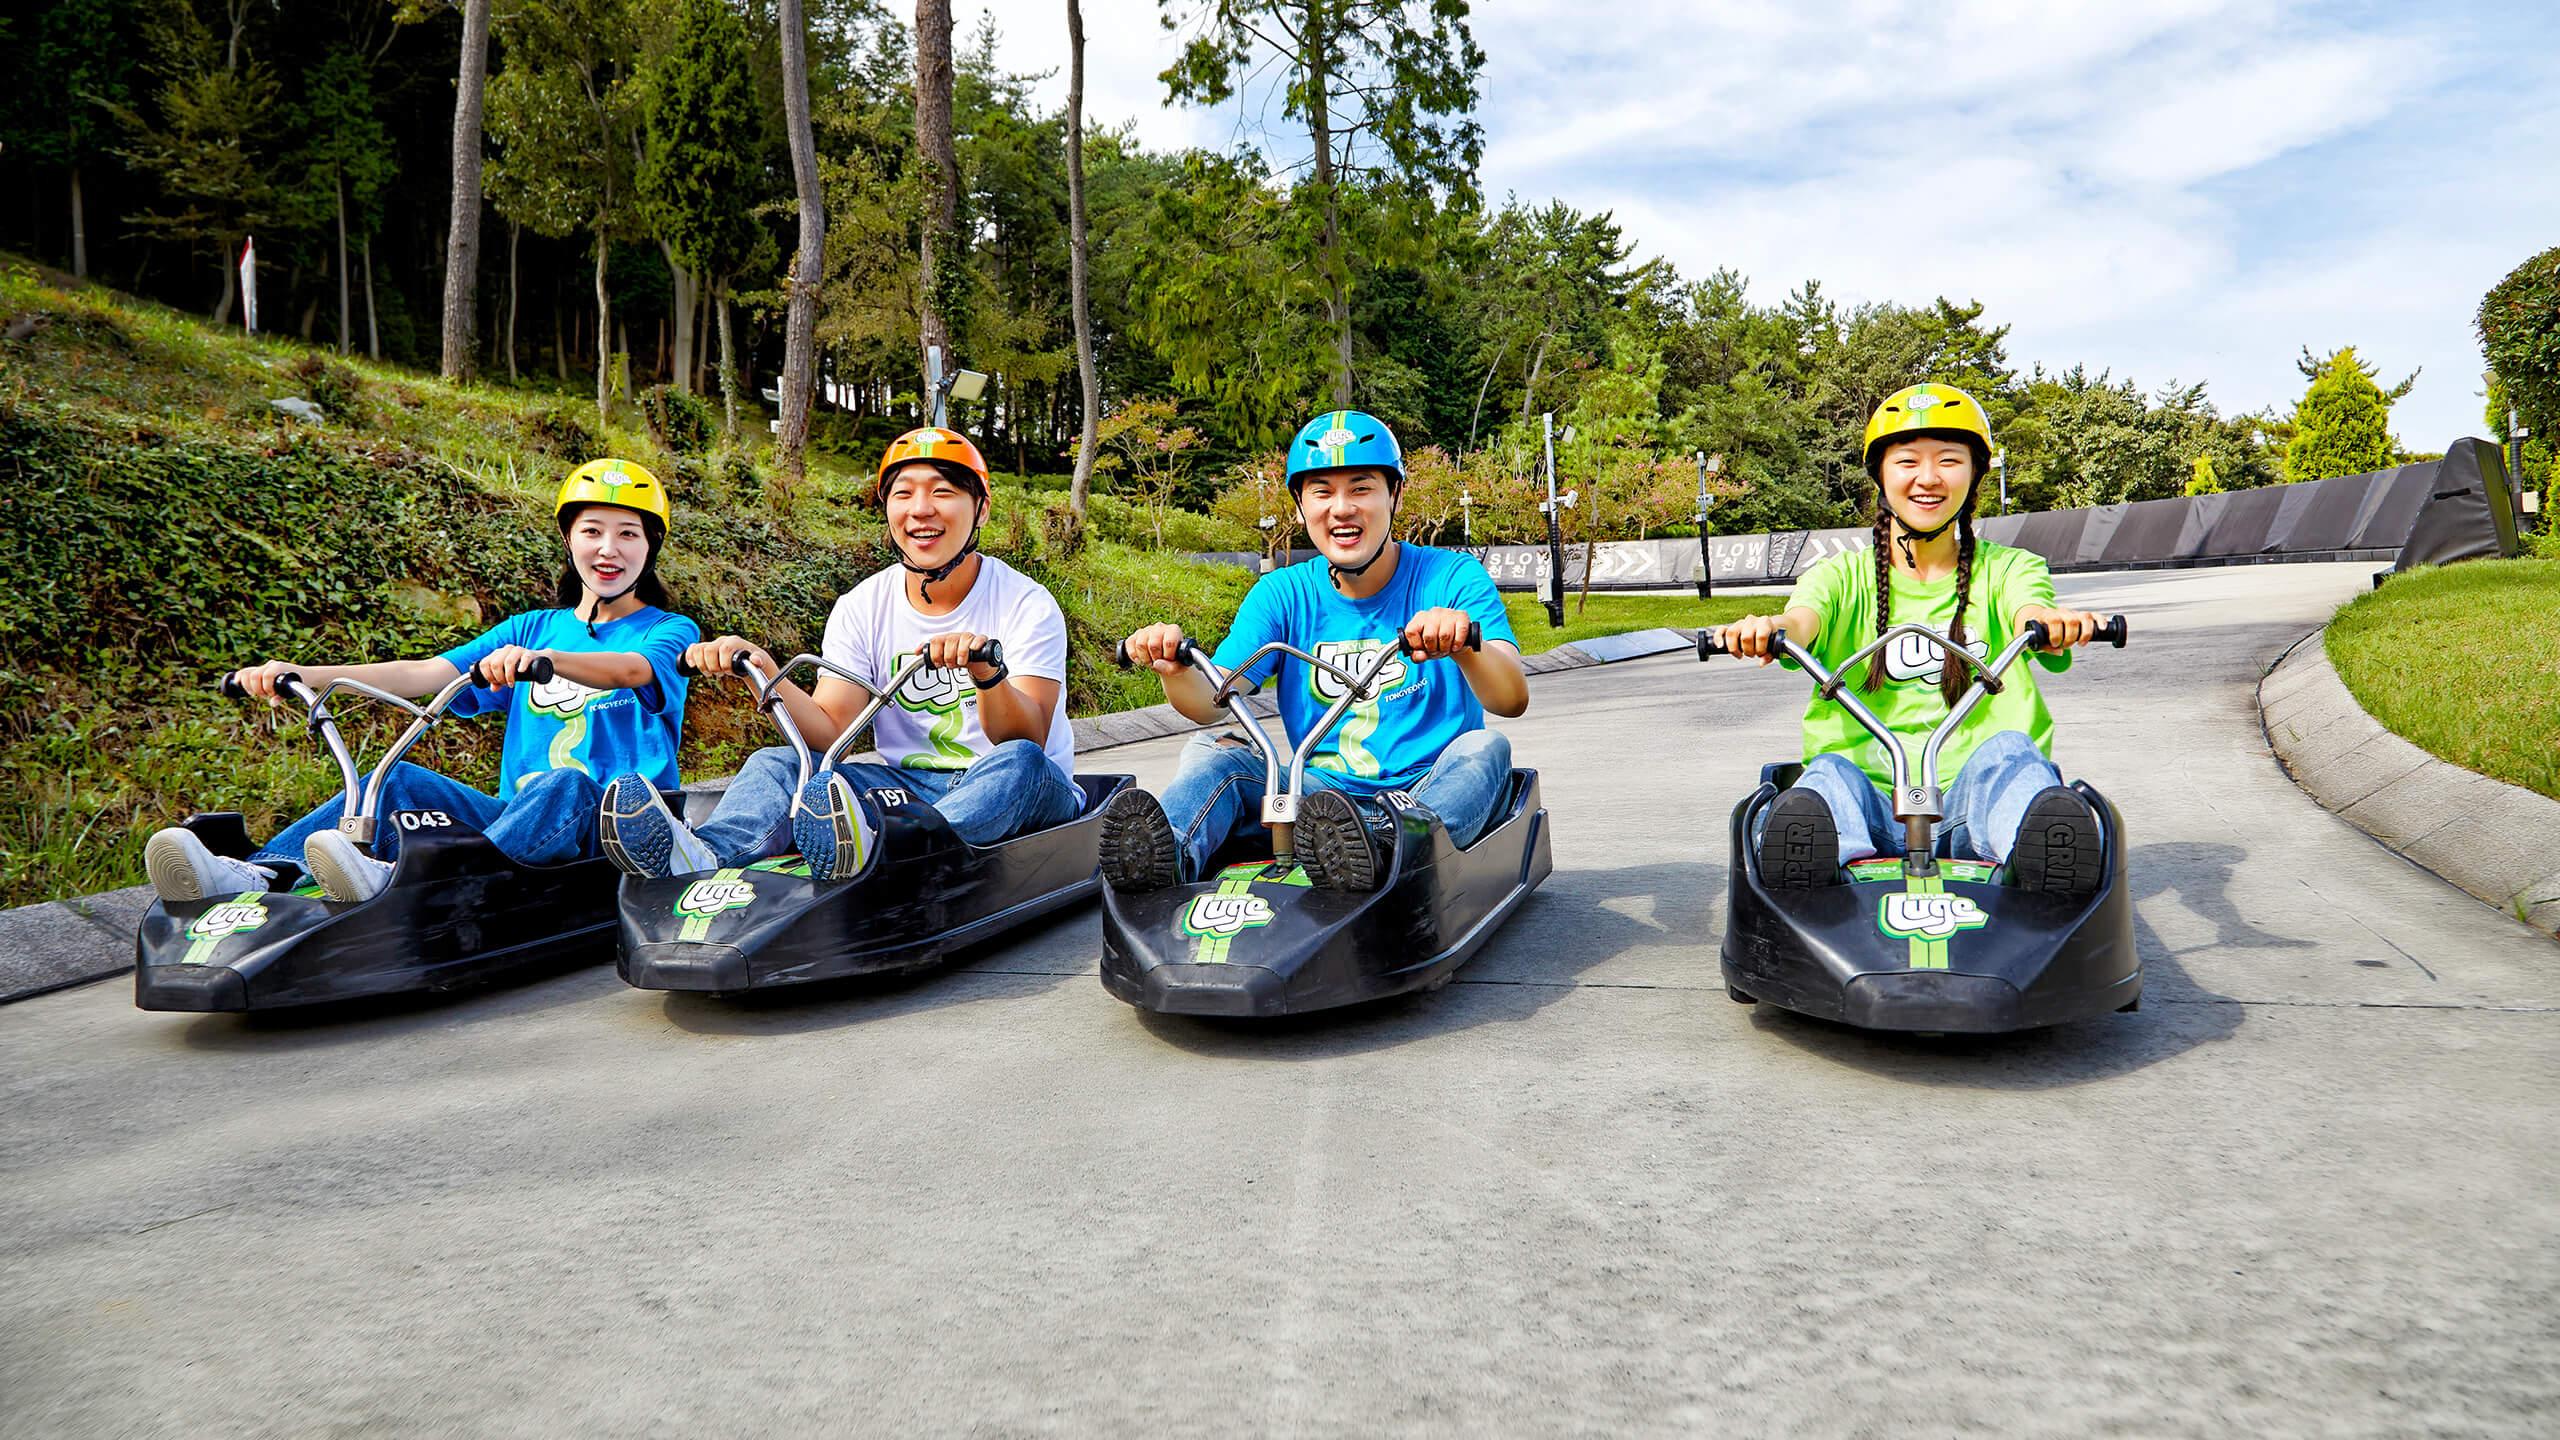 Four friends line up next to each other on the Luge tracks.